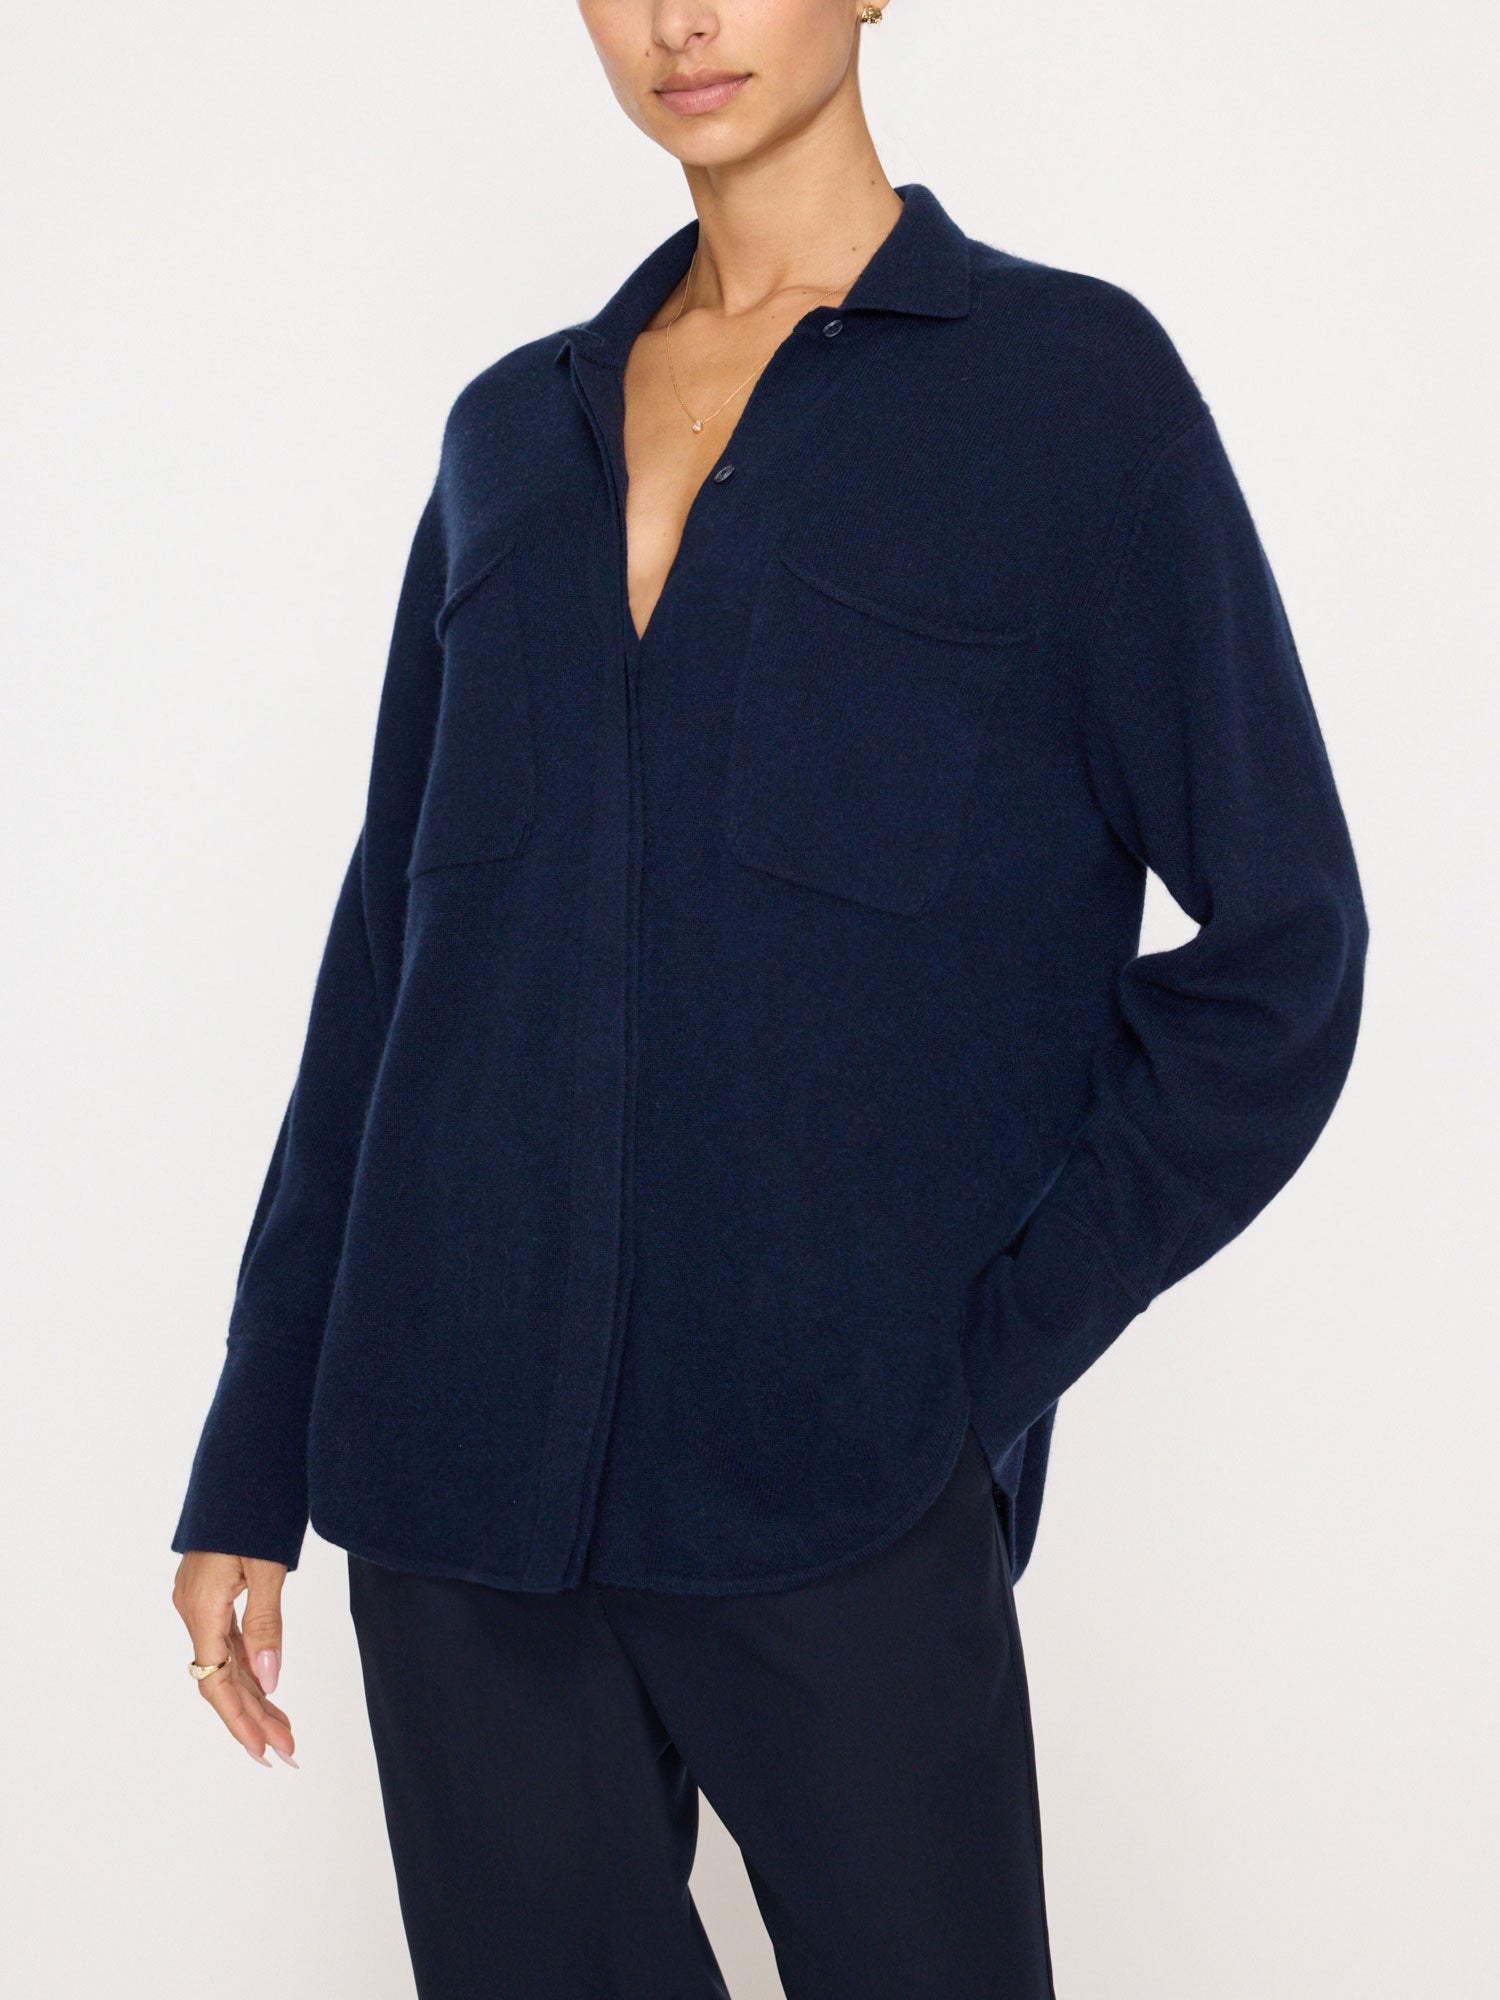 Andre cashmere button down navy shacket front view 3